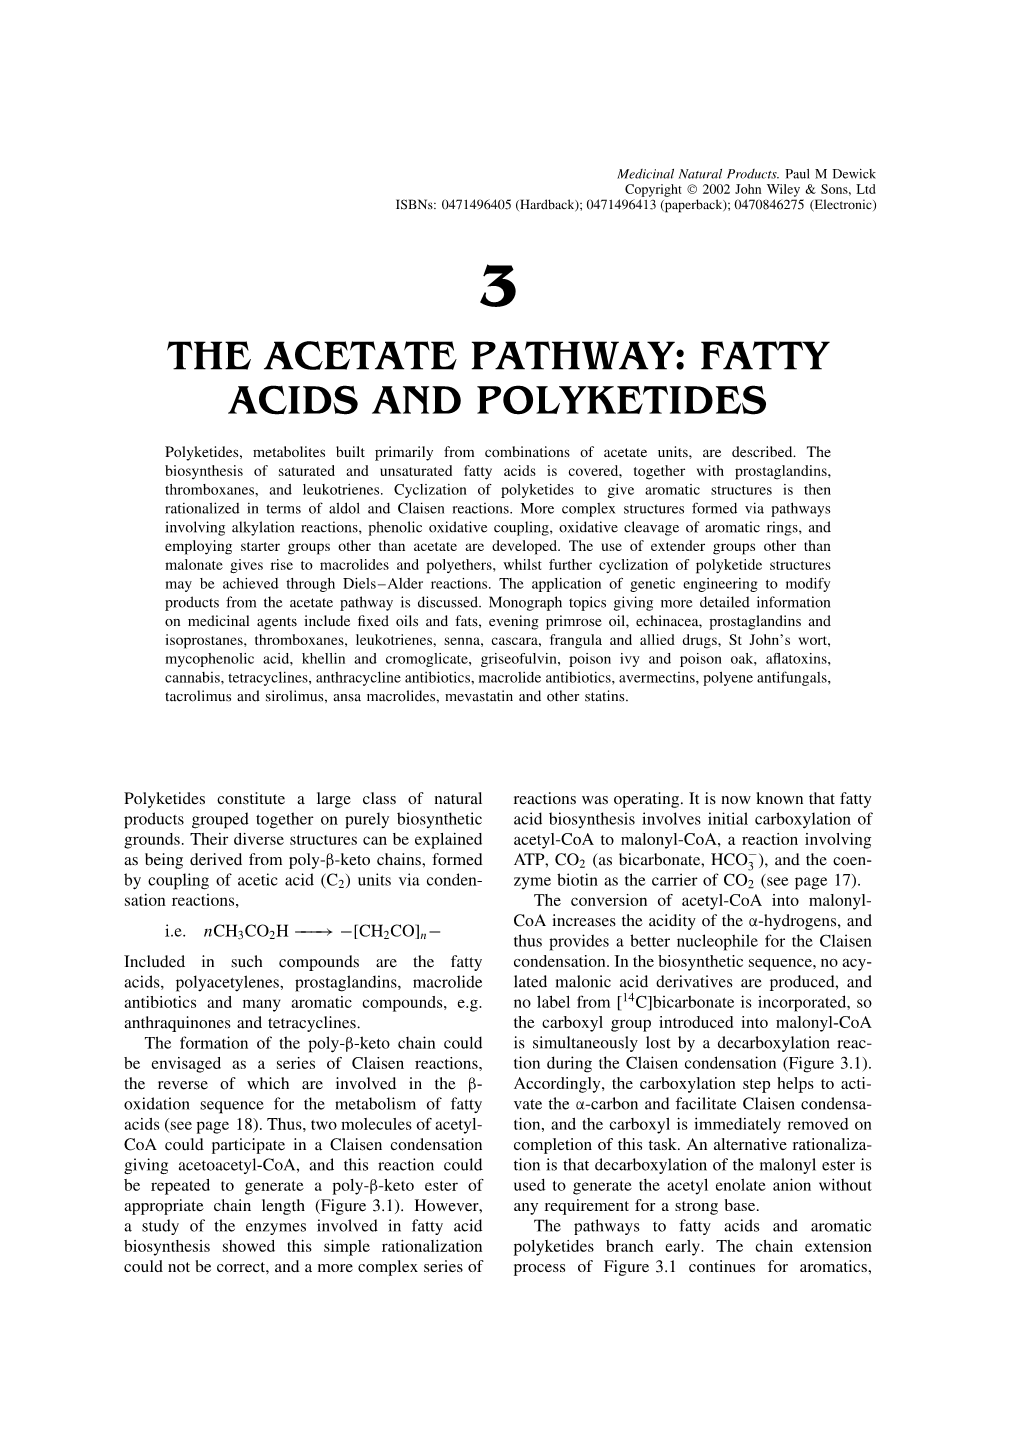 "The Acetate Pathway: Fatty Acids and Polyketides". In: Medicinal Natural